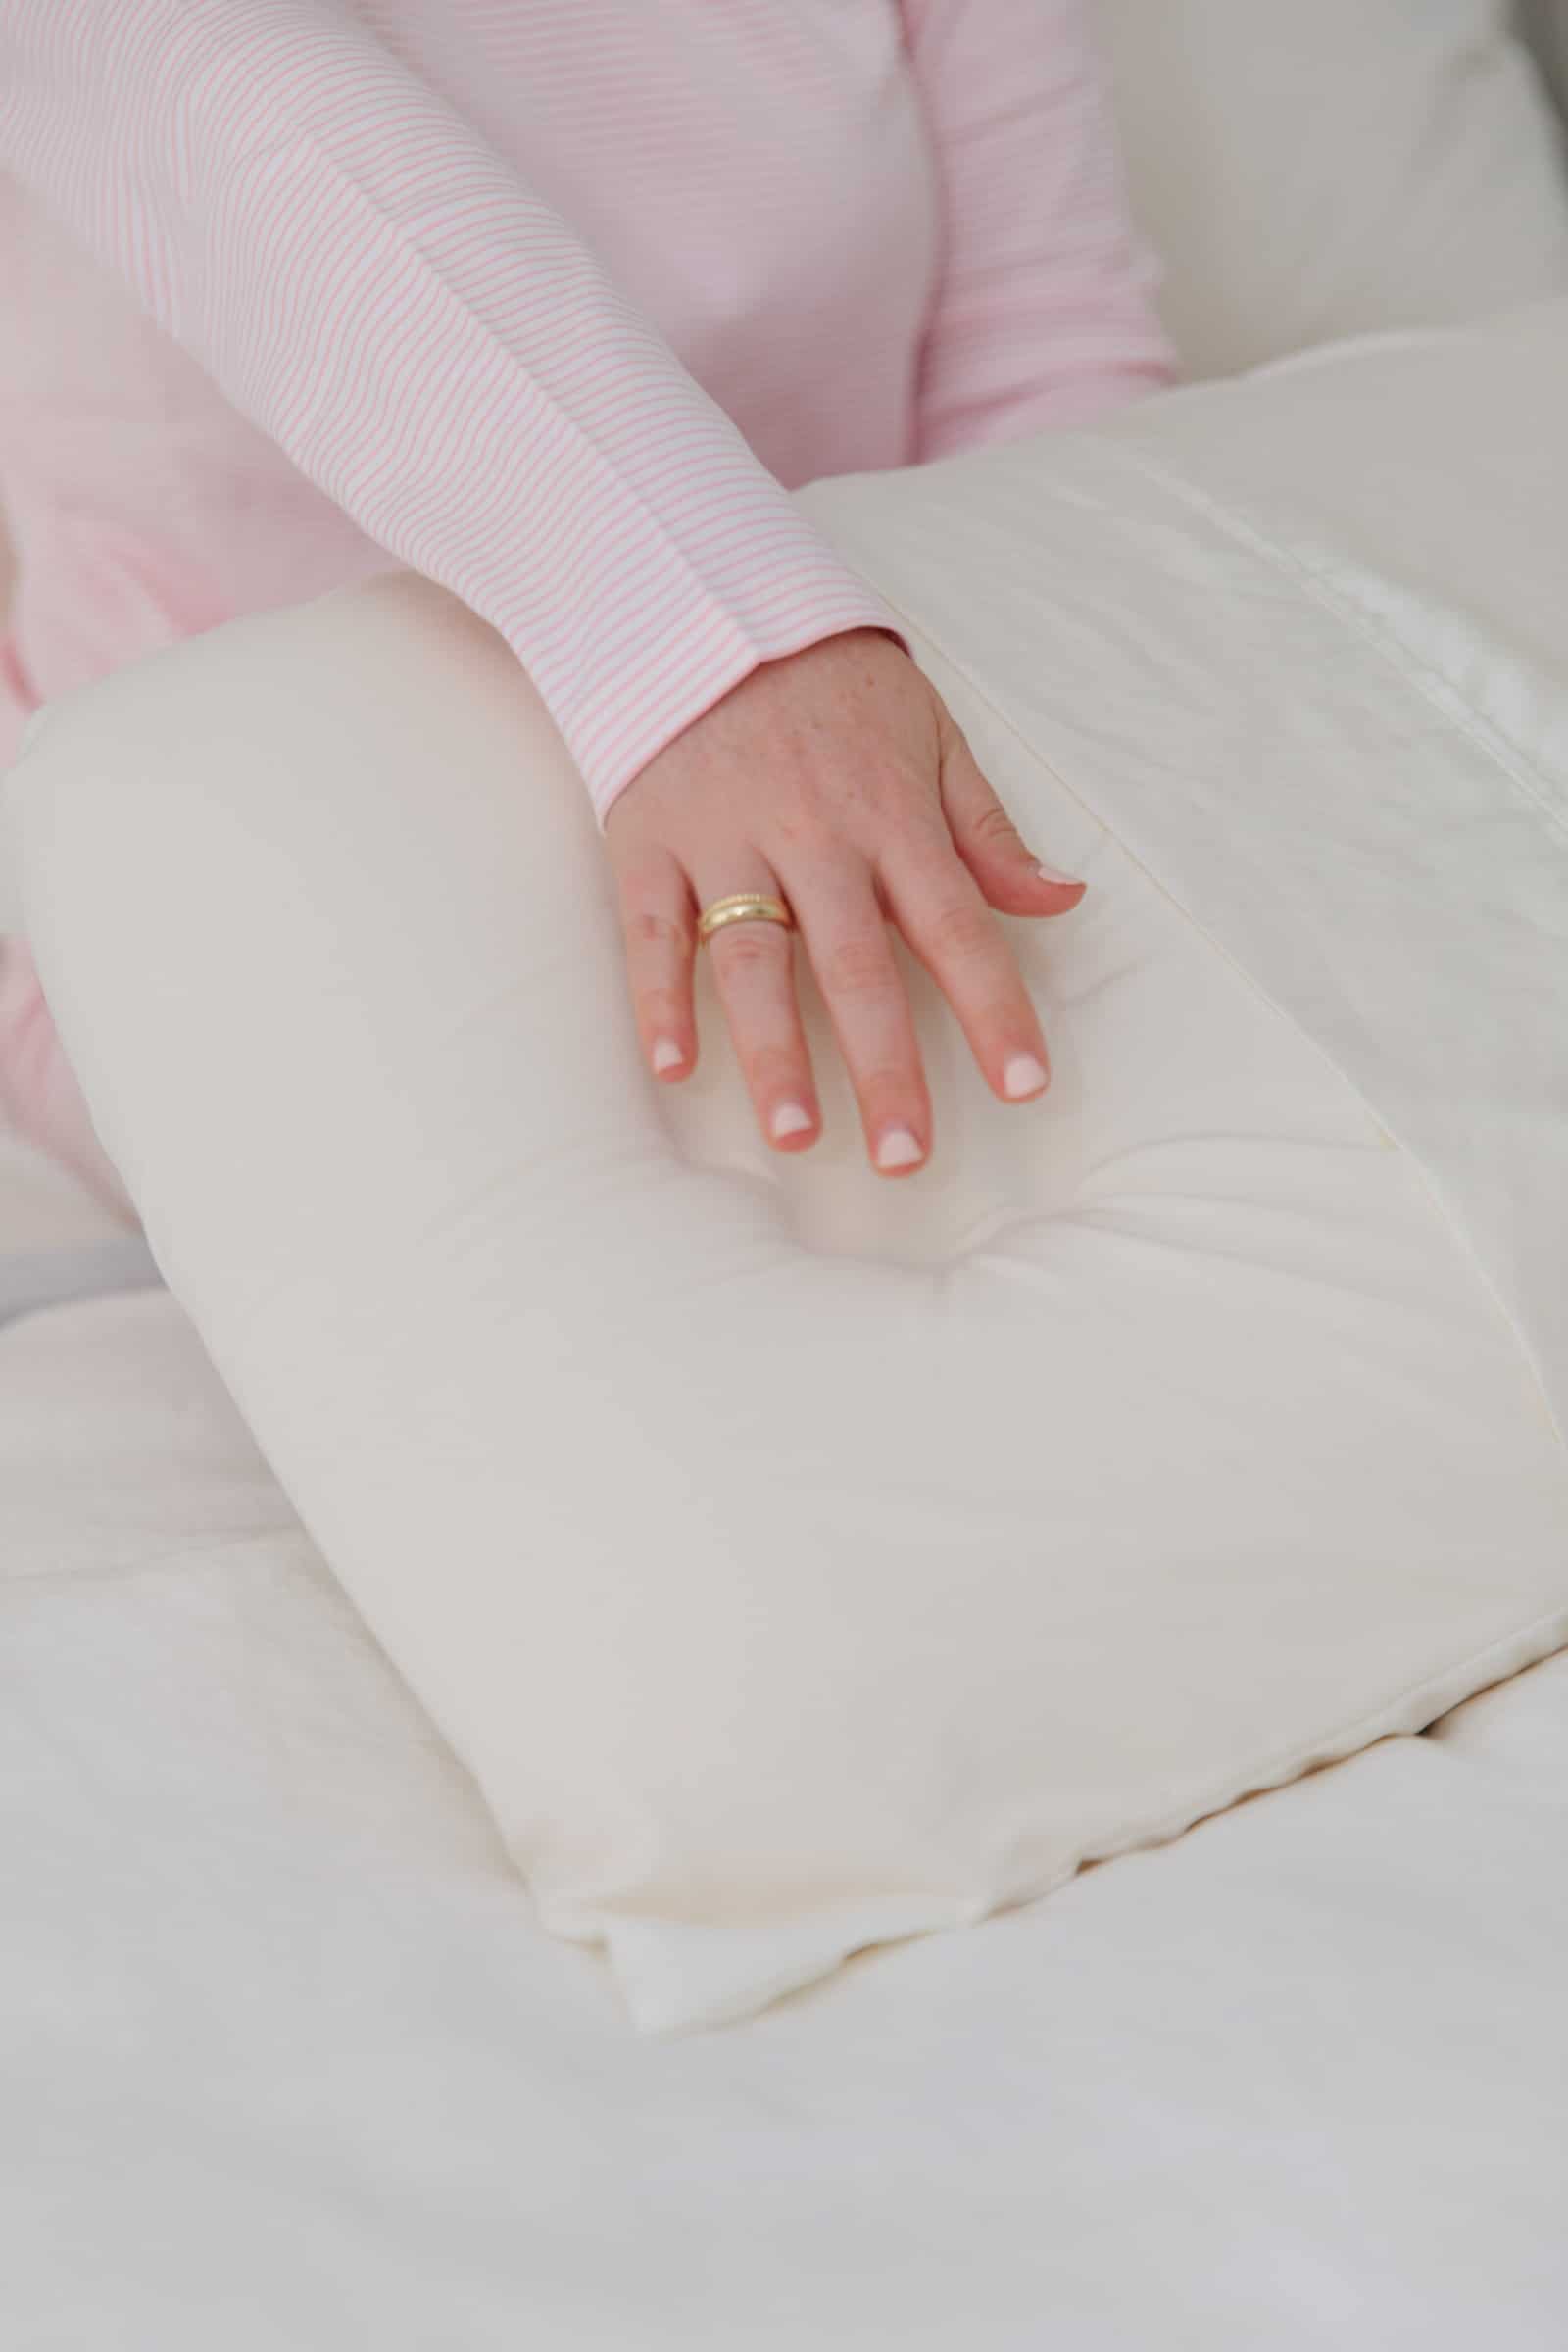 Night Pillow Review